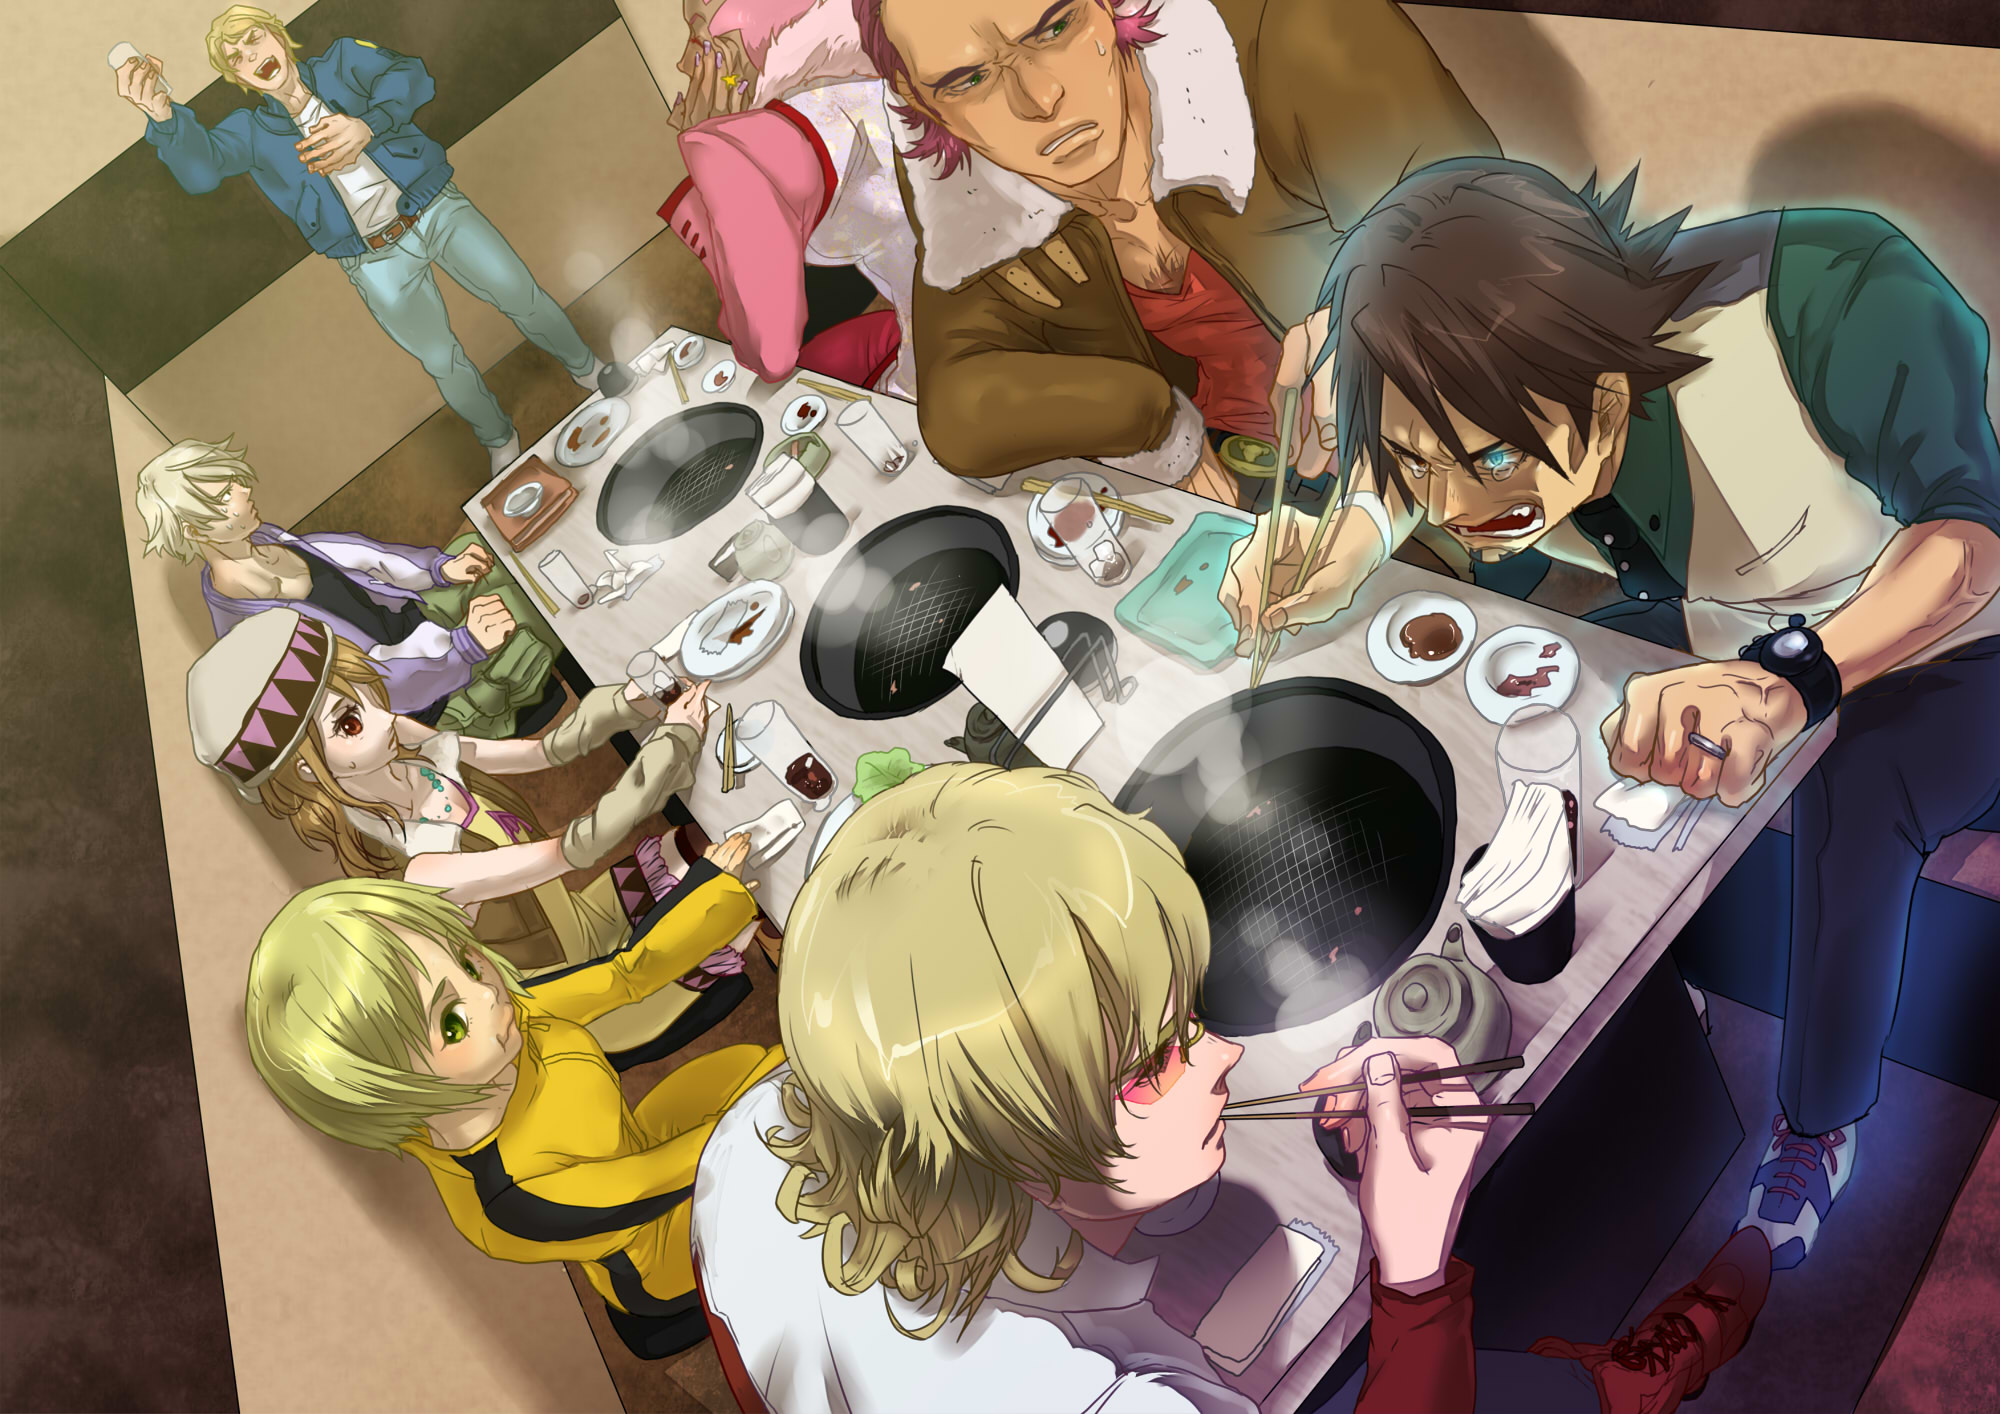 Free download wallpaper Anime, Tiger & Bunny on your PC desktop